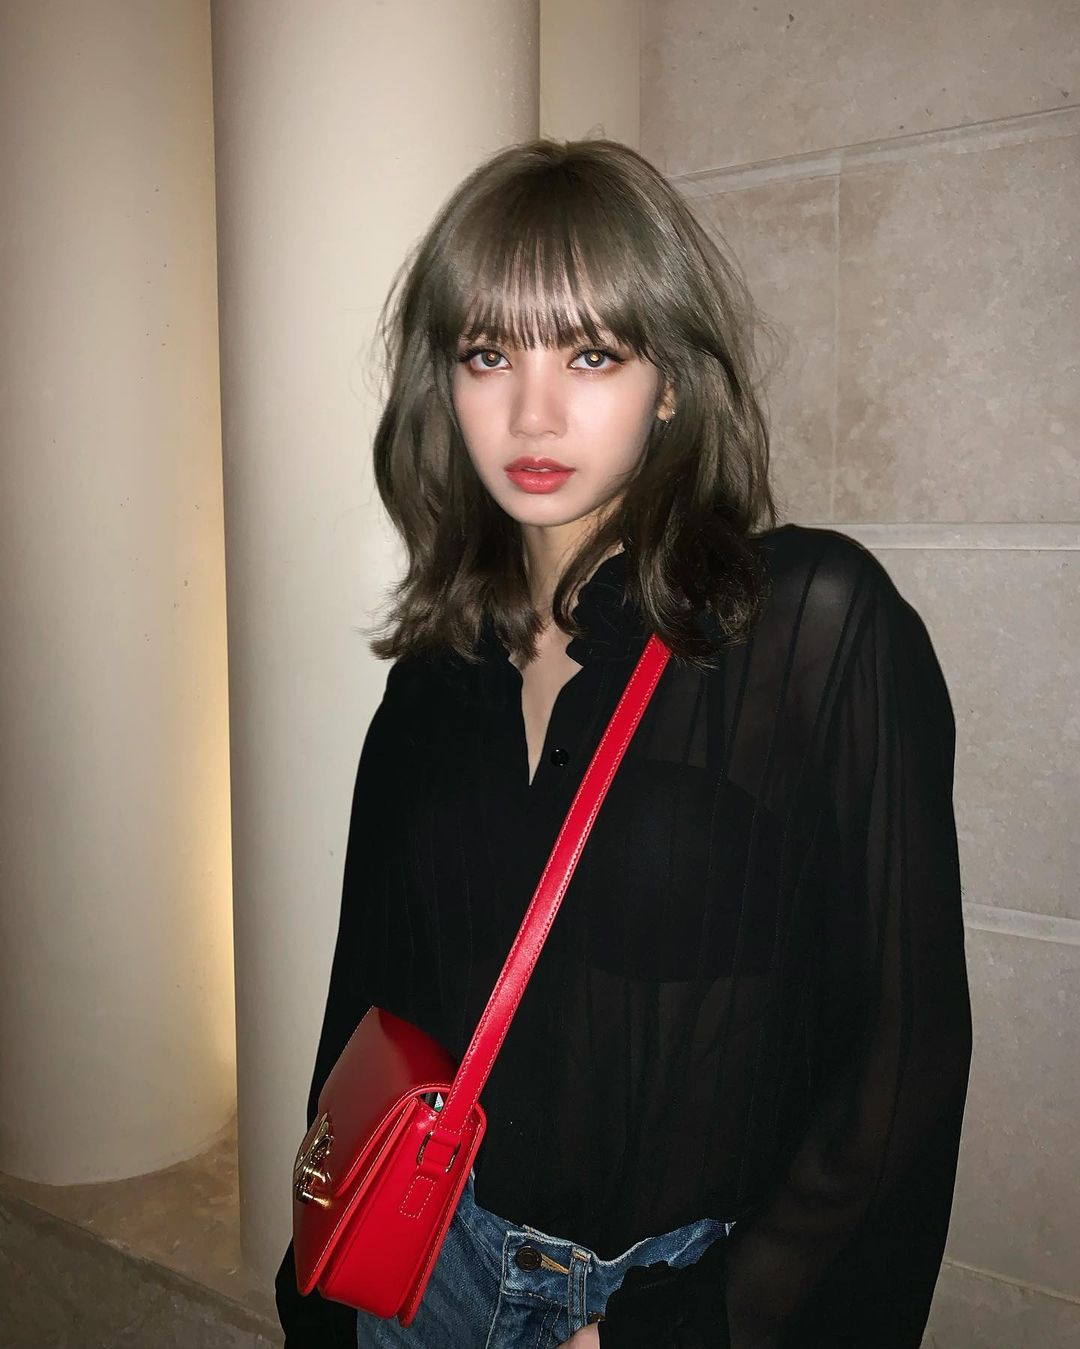 BLACKPINK's Lisa Showed Off Her Red Hair and Bangs